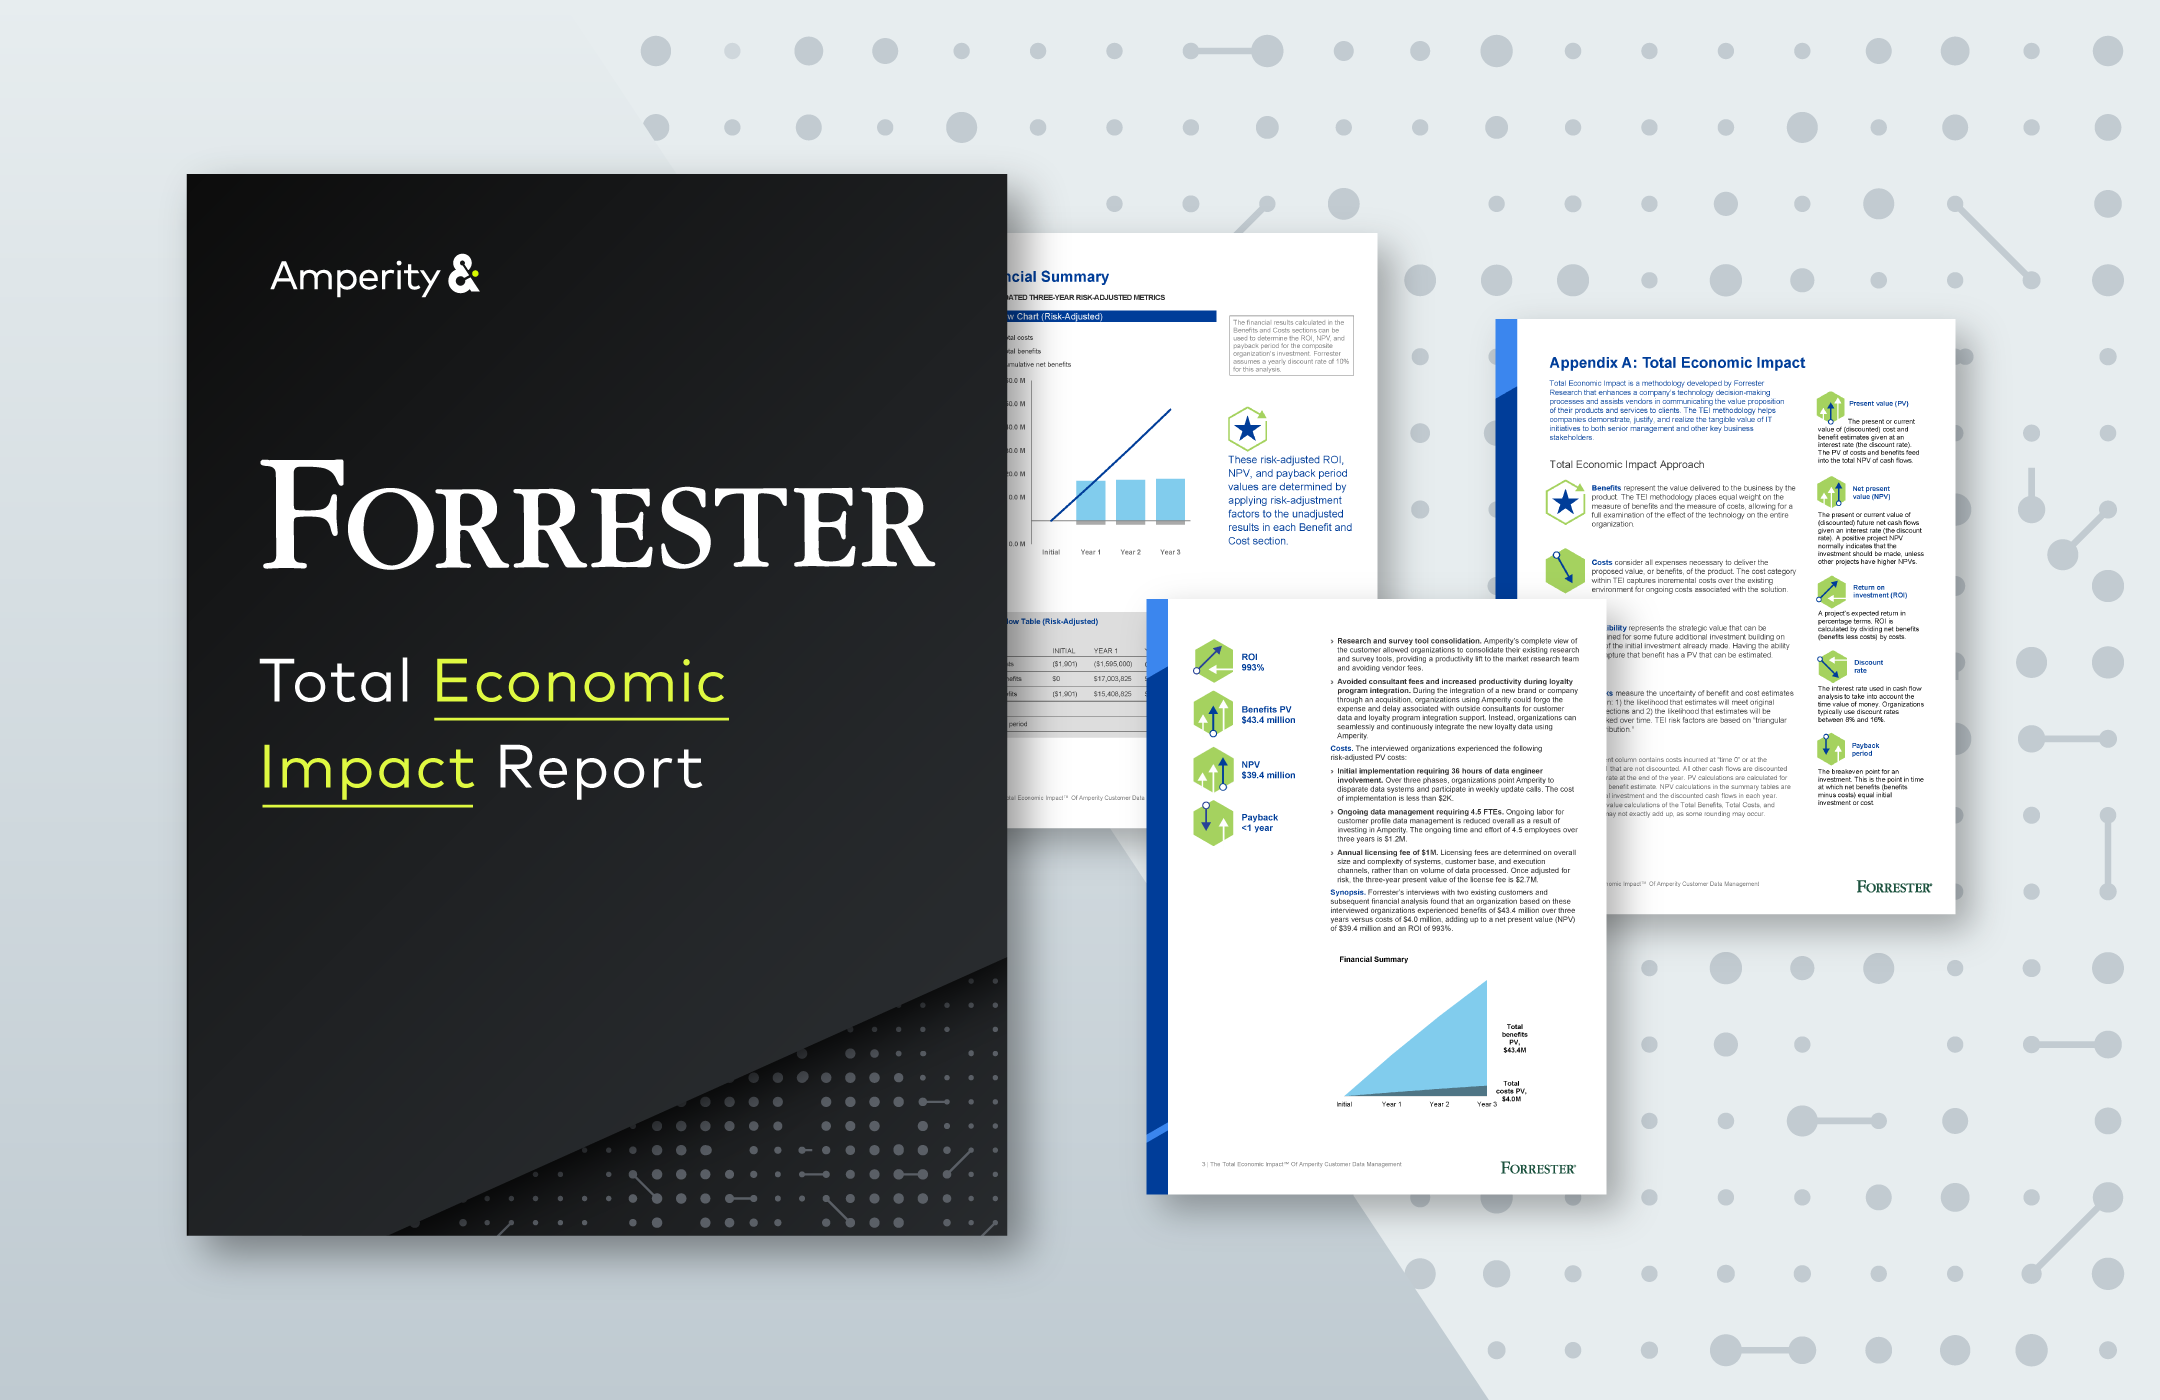 Forrester Total Economic Impact Report cover and sample pages